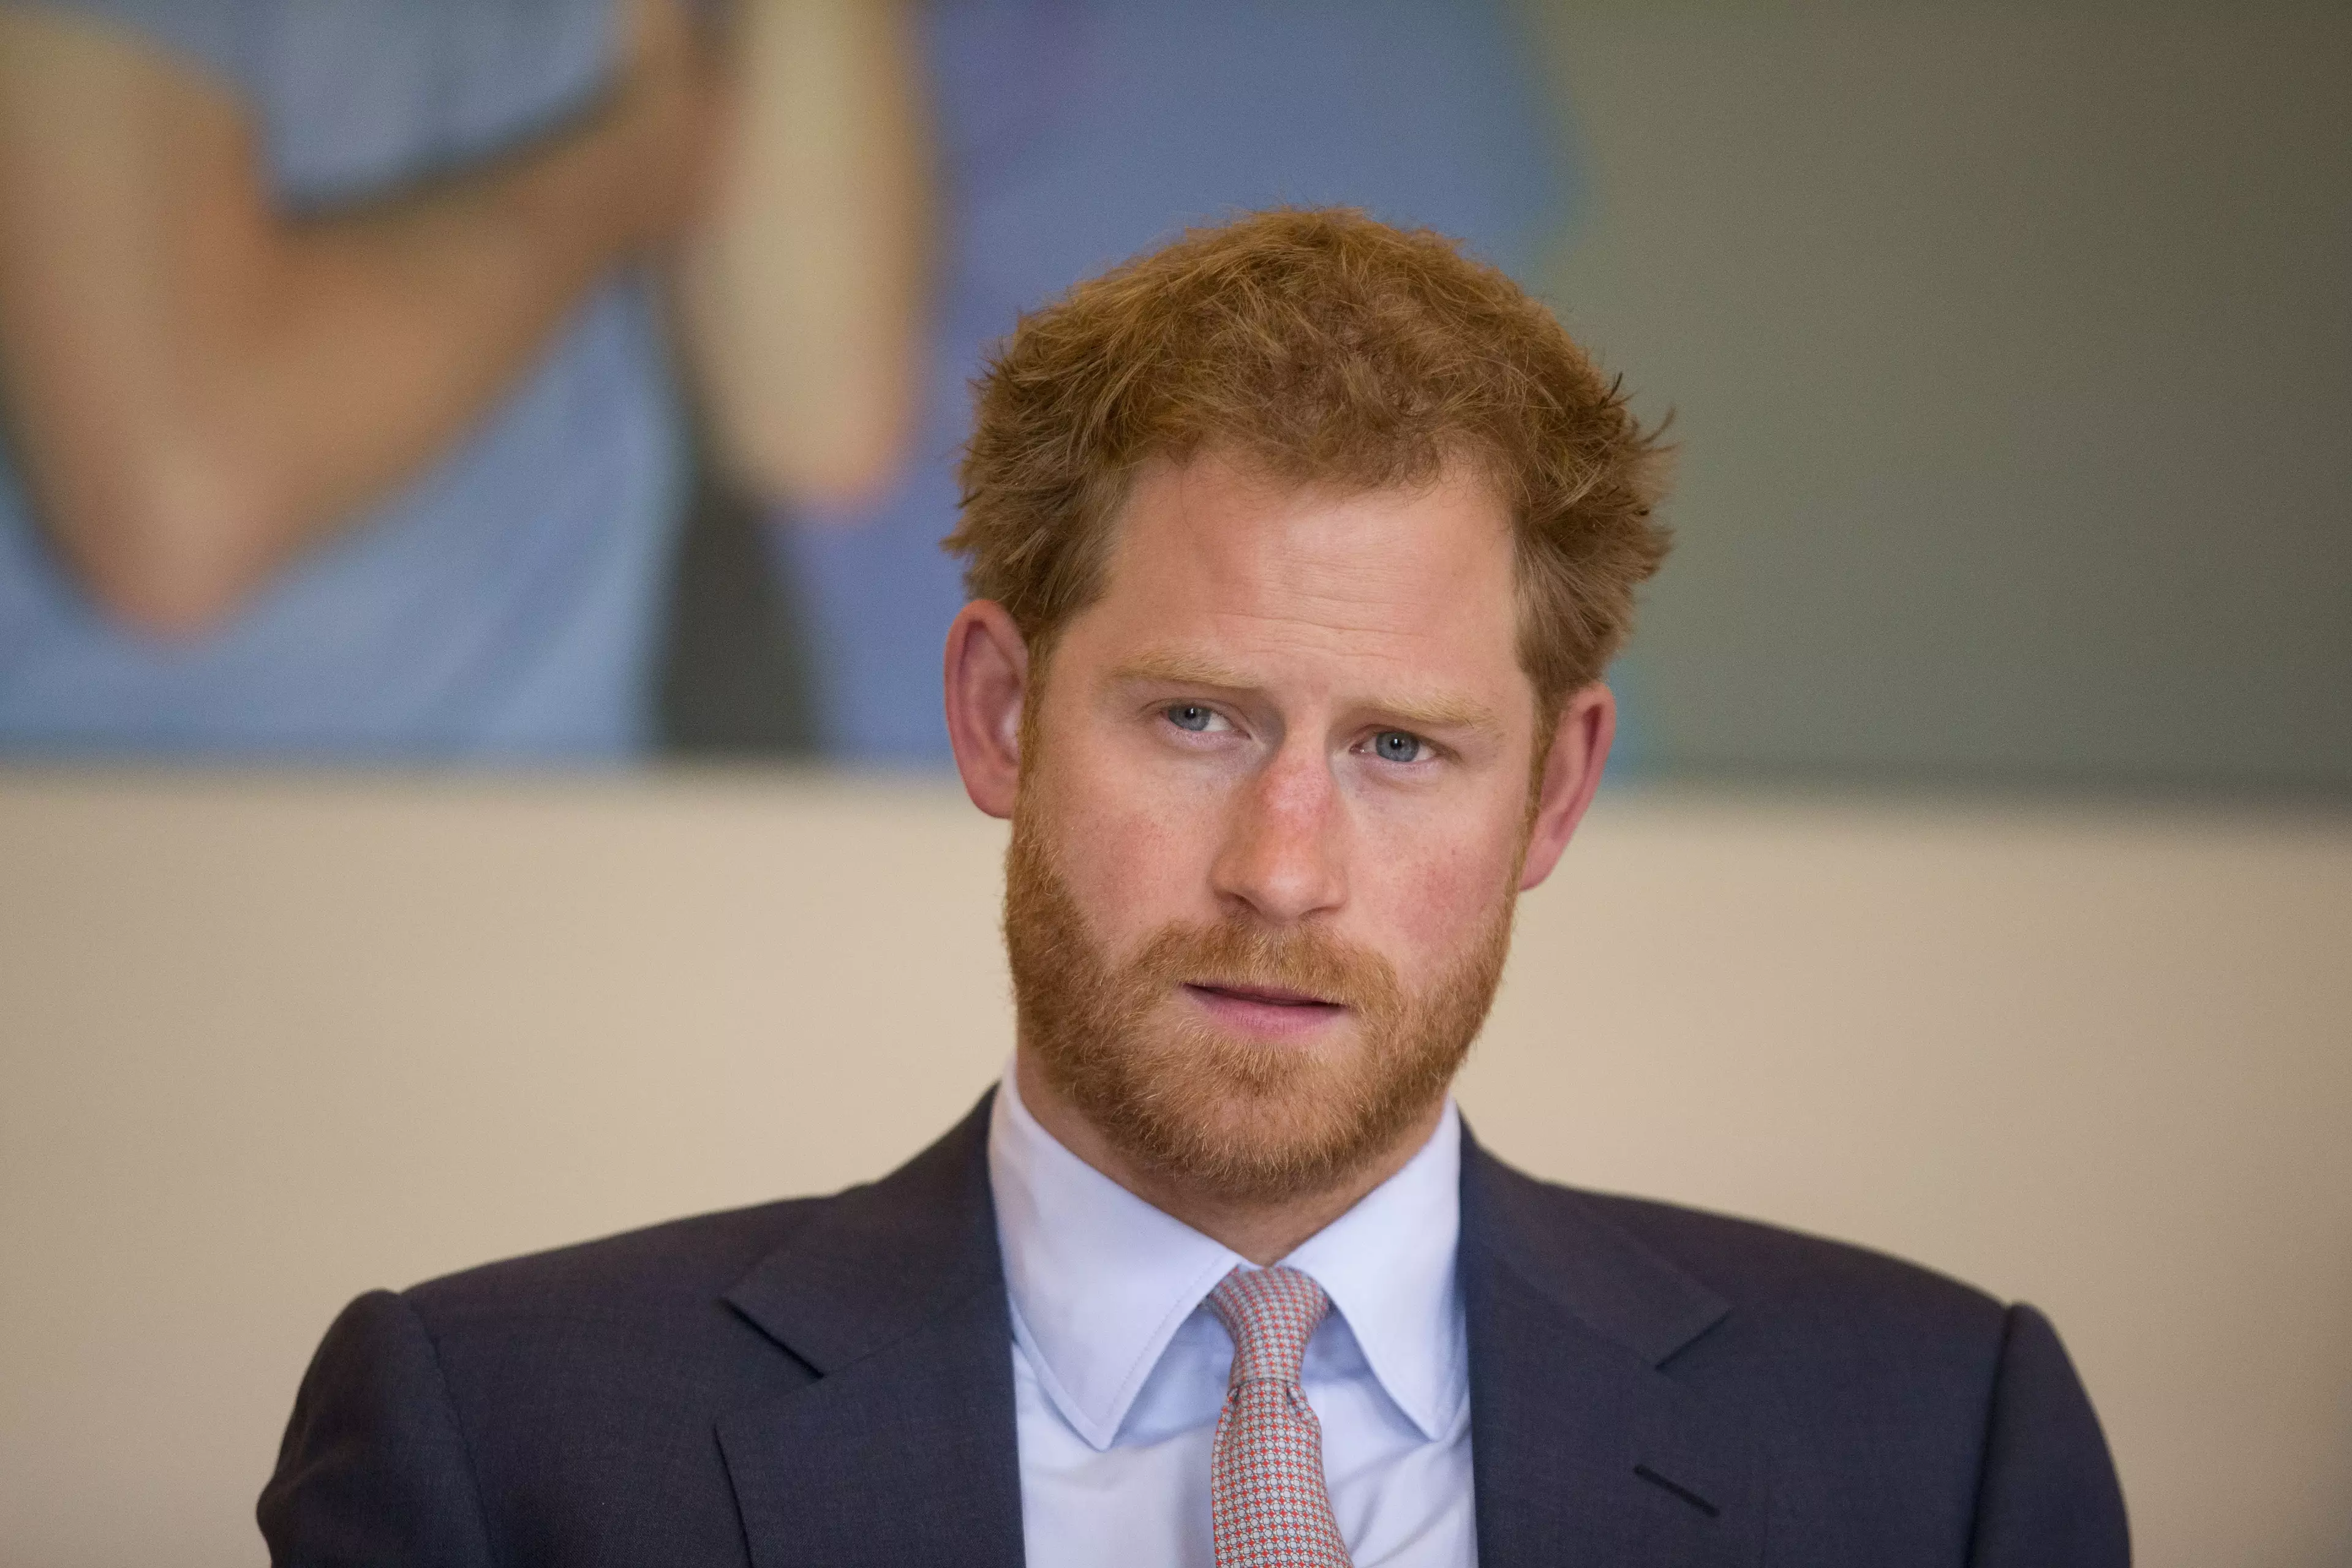 Prince Harry Is Said To Be Secretly Dating 'Suits' Actress Meghan Markle